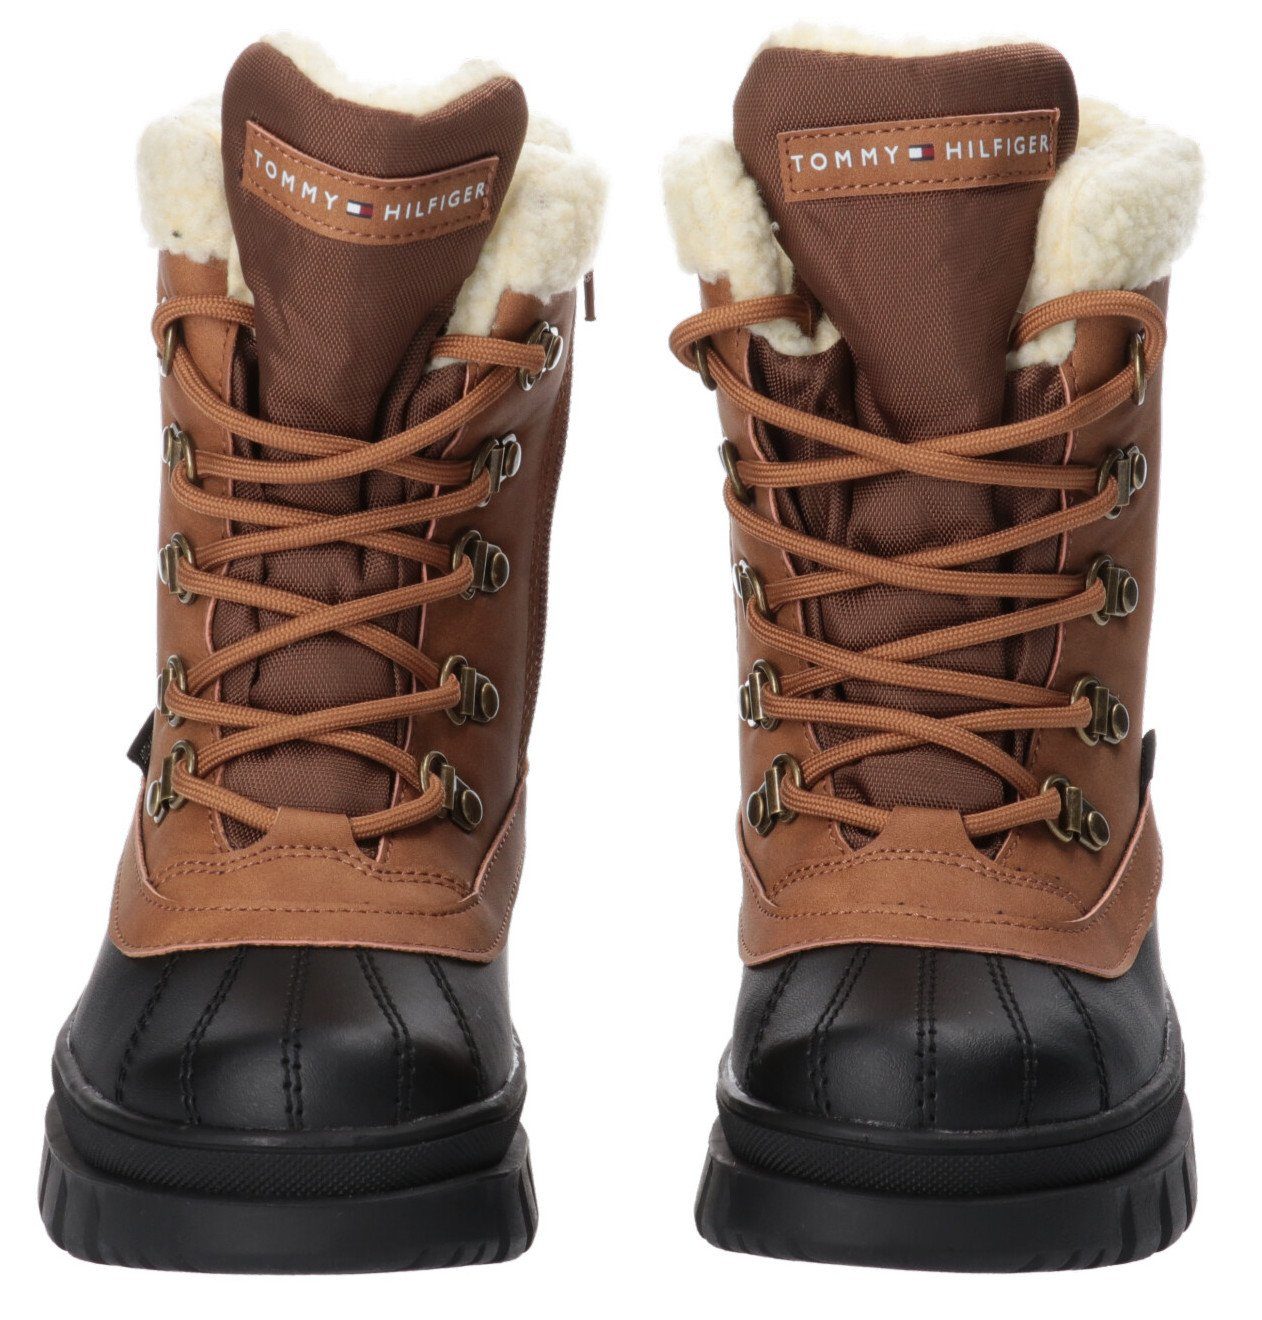 Thermostiefel LACE-UP BOOT Tommy Snowboots mit Warmfutter Hilfiger